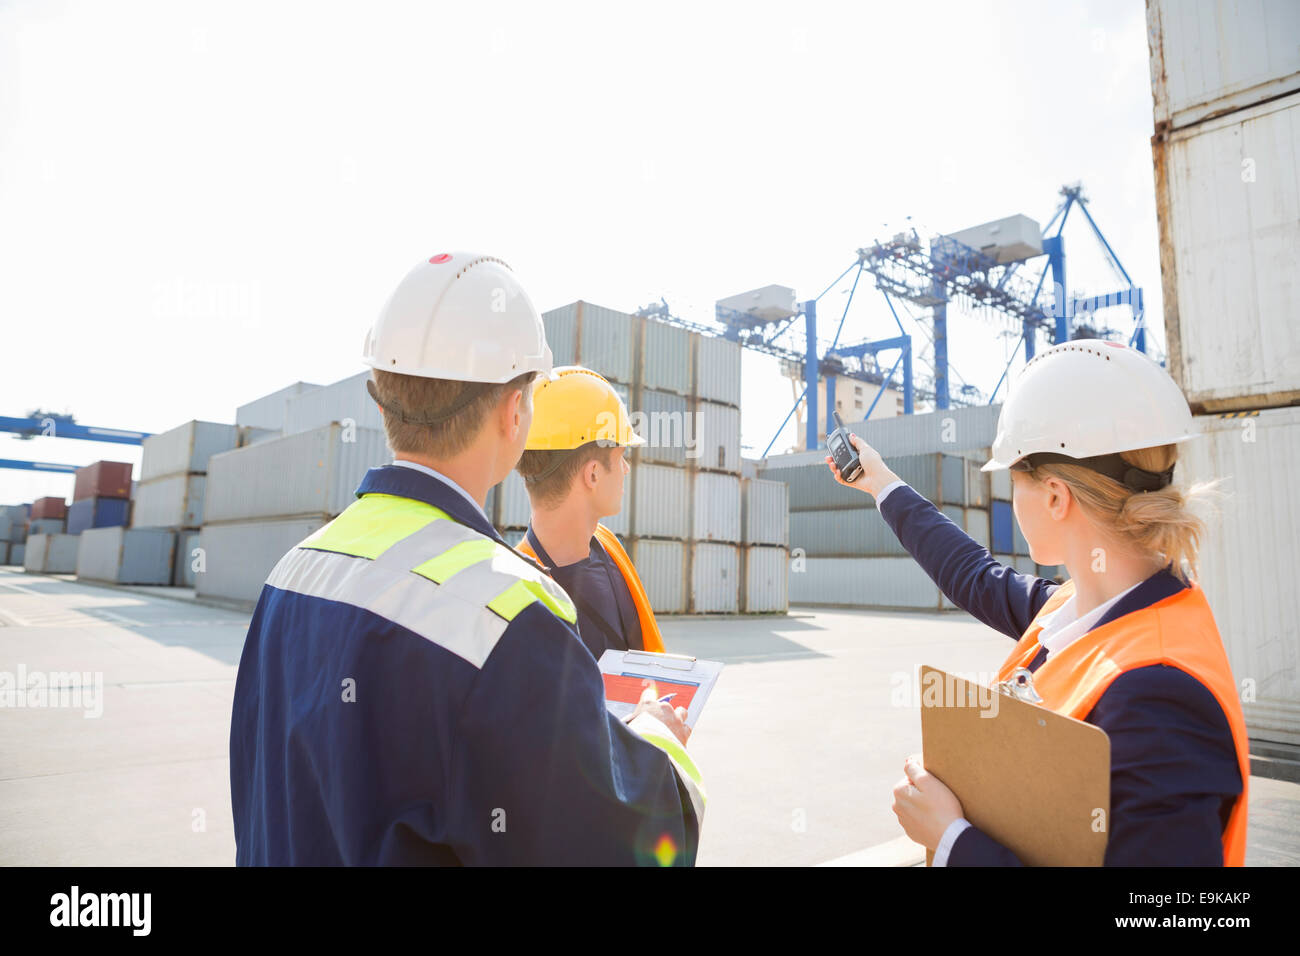 Female supervisor discussing with workers in shipping yard Stock Photo